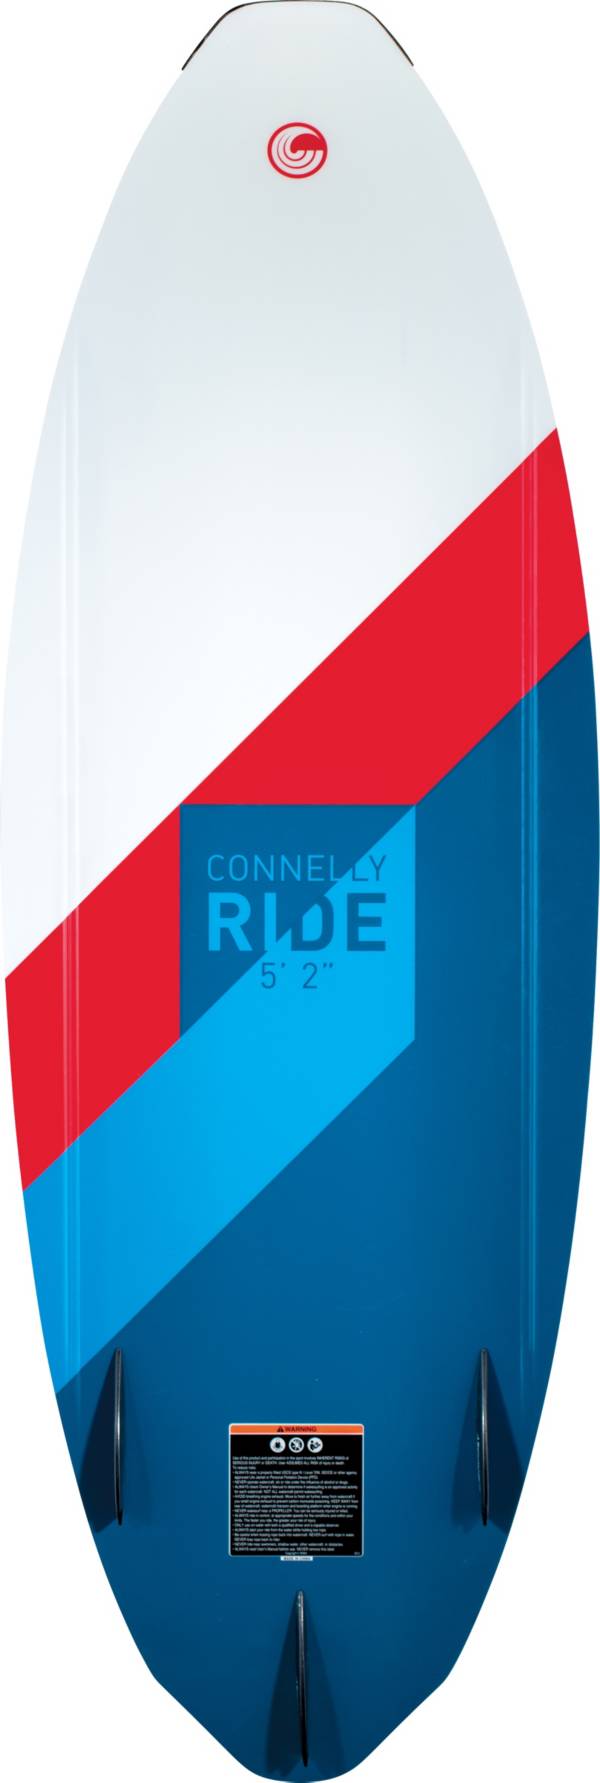 Connelly Ride Wakesurfer Board product image